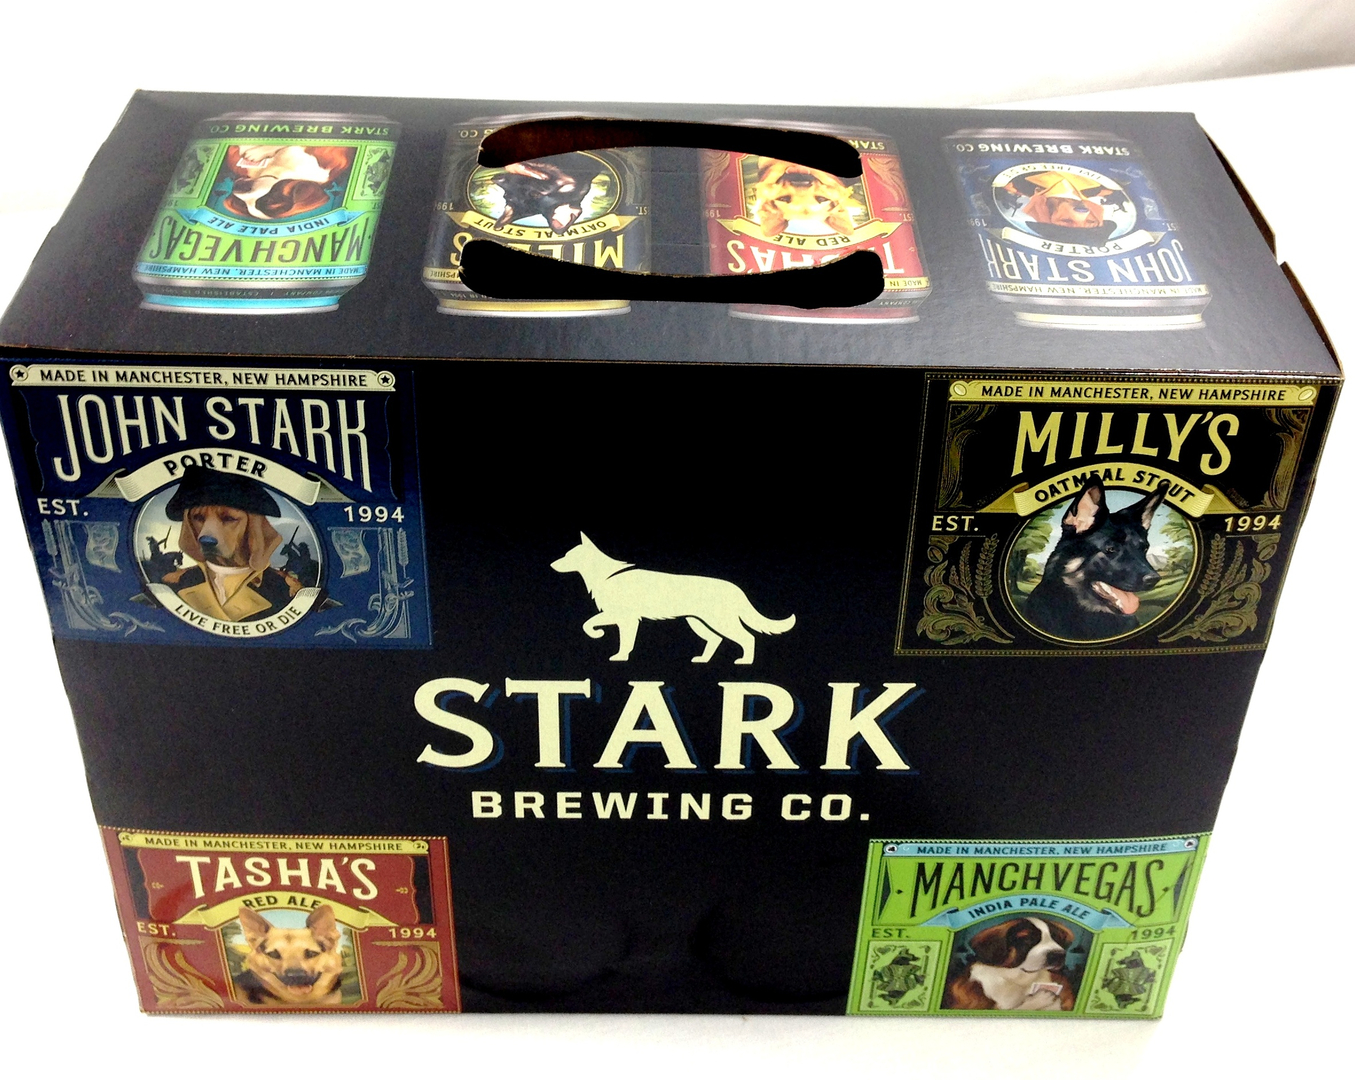 Stark Brewing Company Printed on a Box